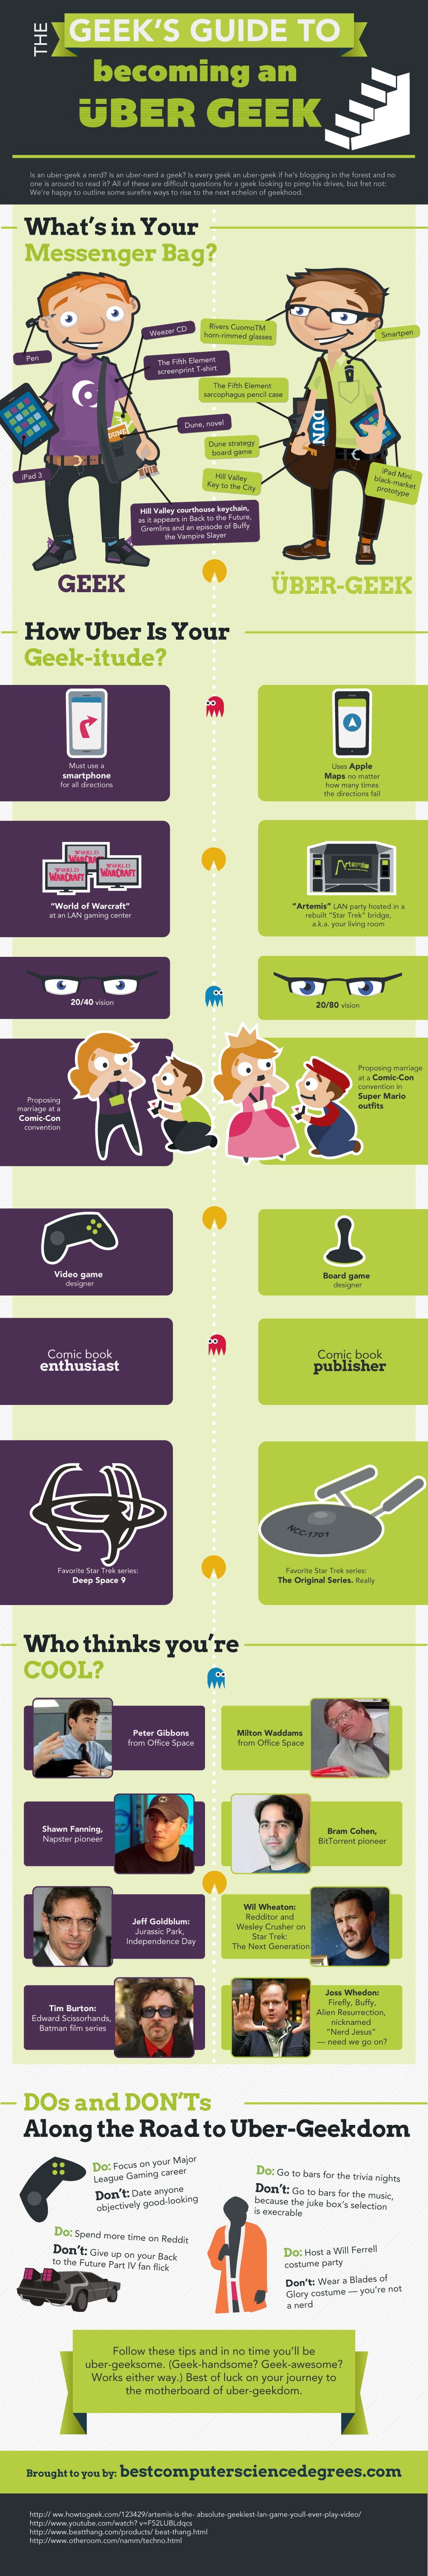 Infographic: The Geek's Guide to Becoming an Uber-Geek